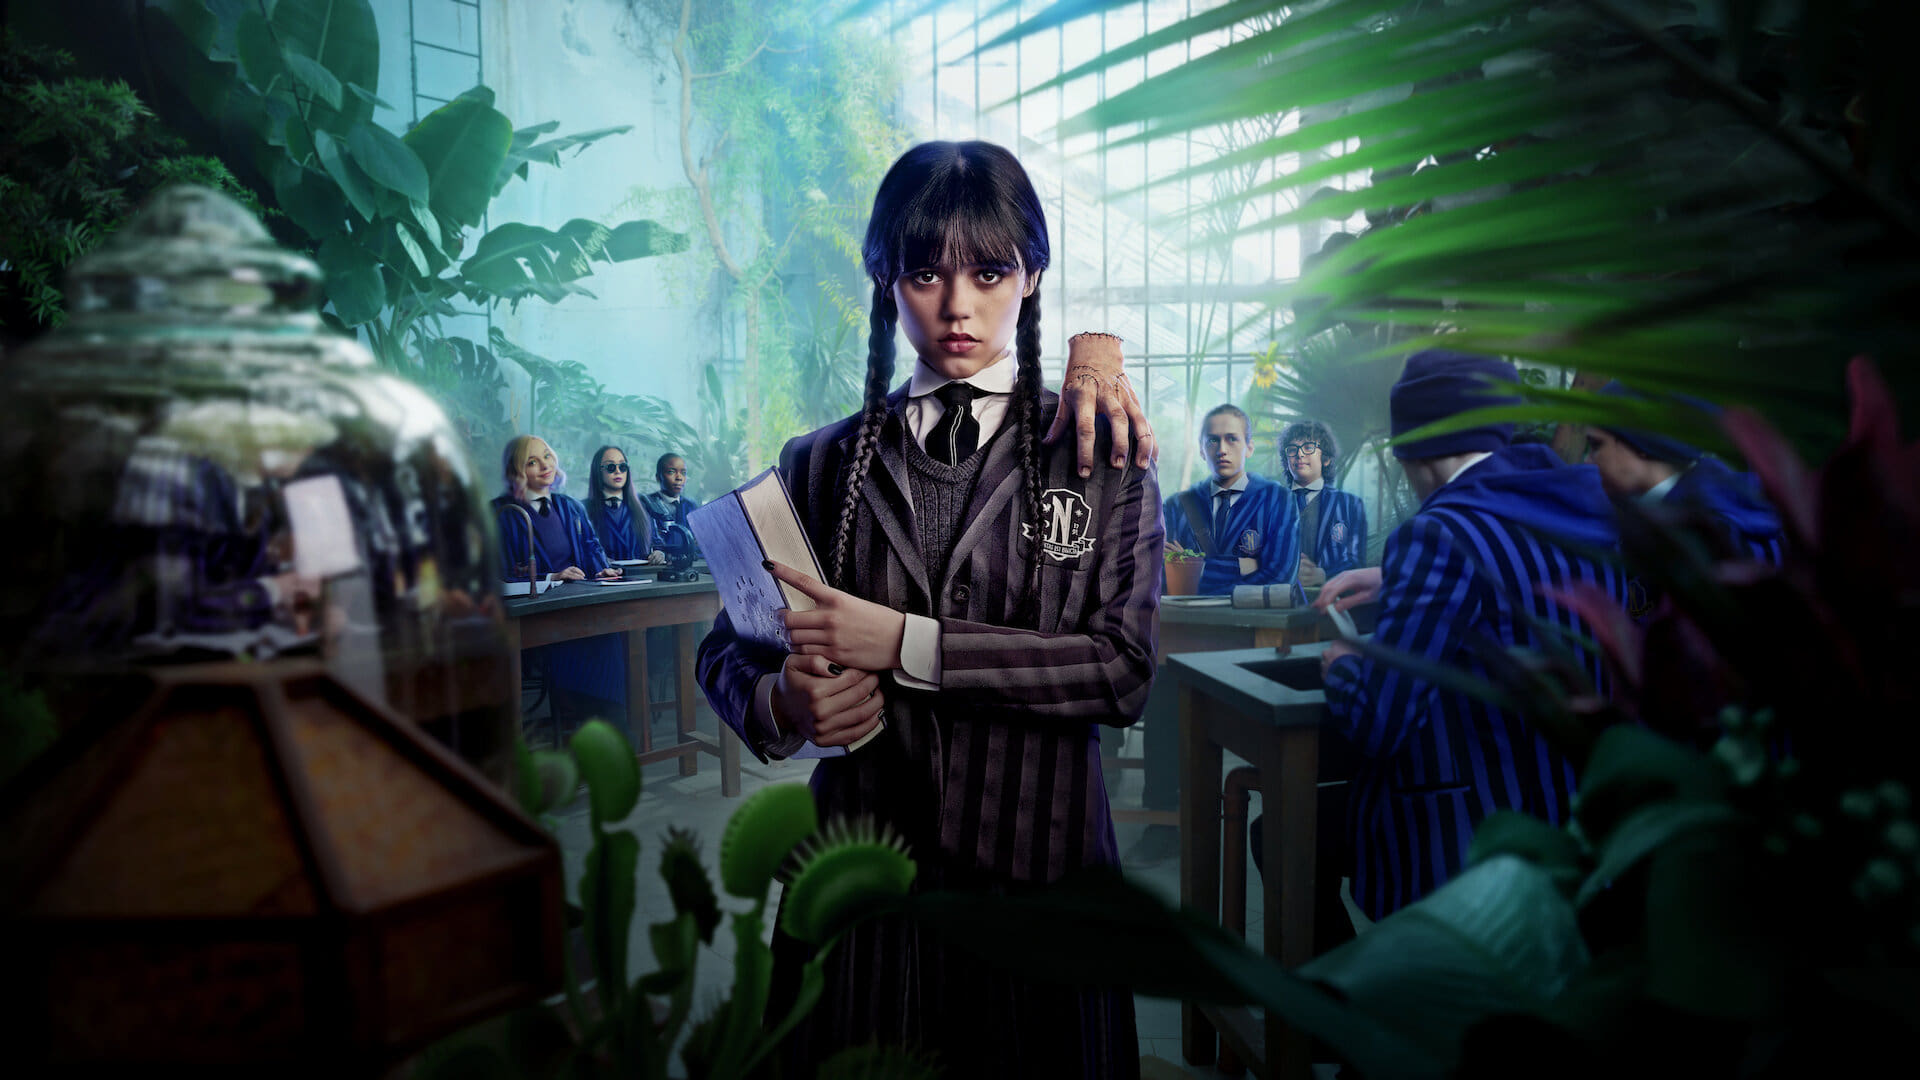 Wednesday: Netflix Reveals 10 Characters for Tim Burton's Addams Family  Spinoff